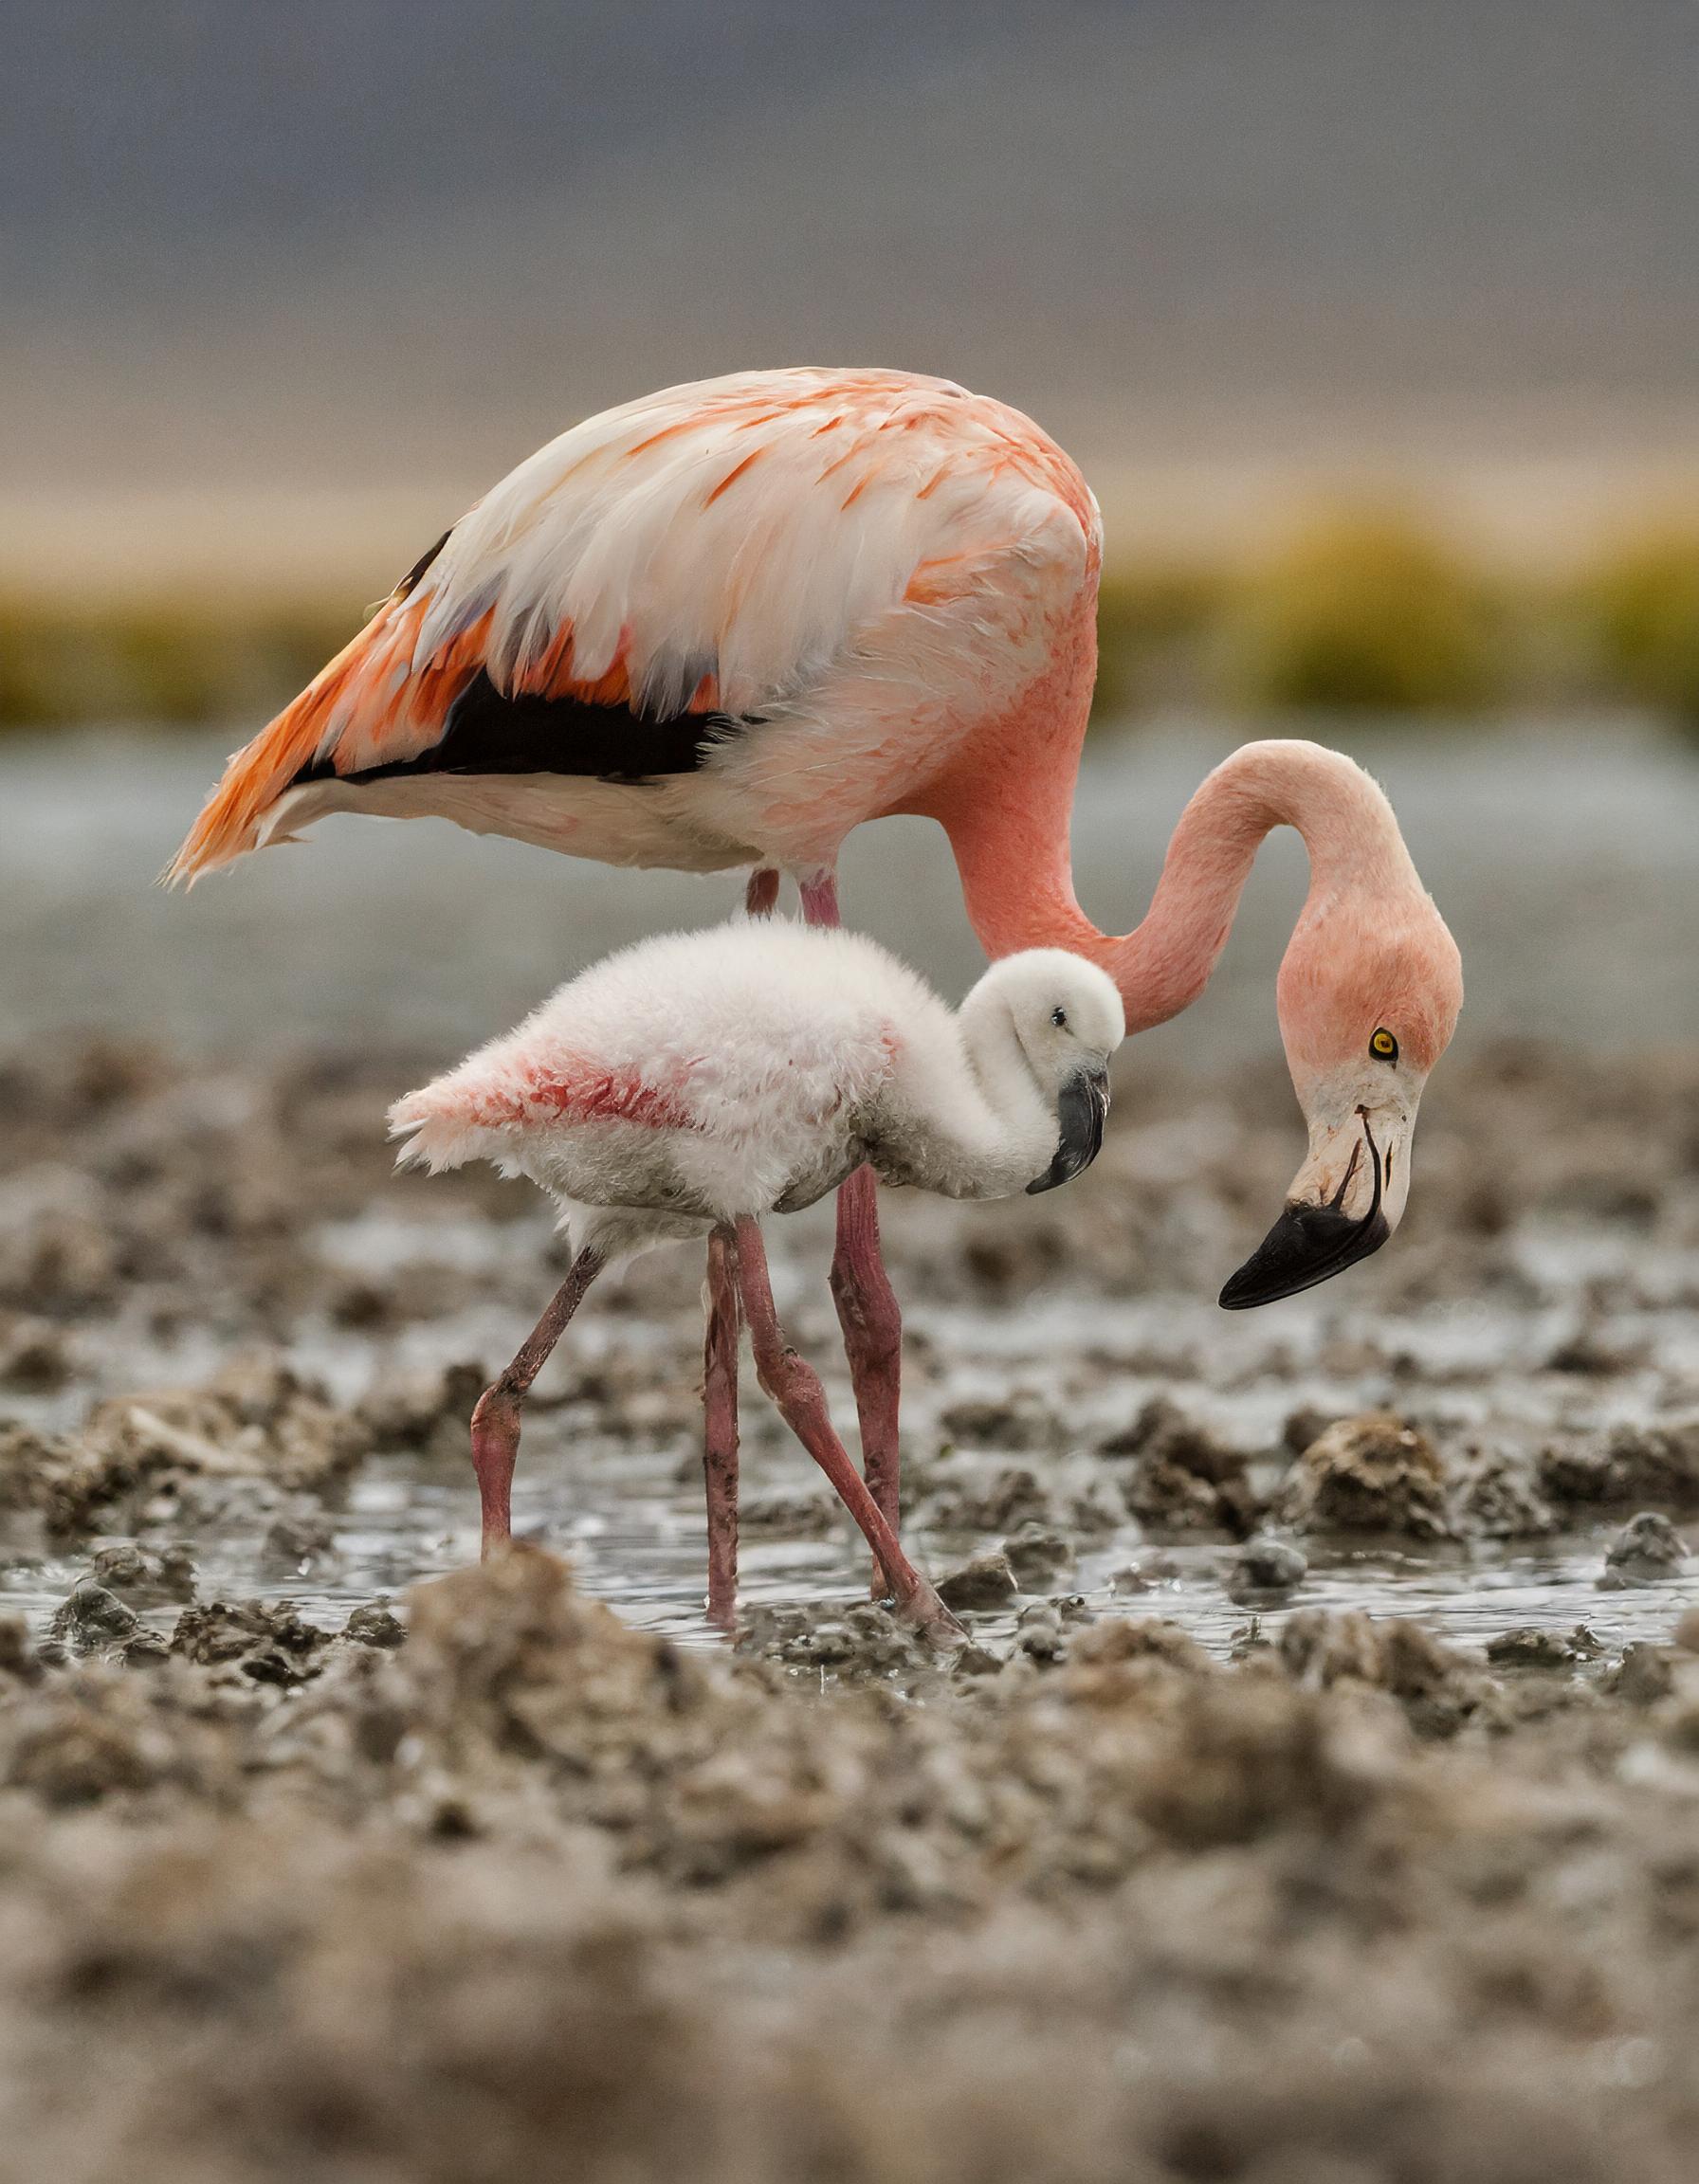 An Andean flamingo caring for its chick in Patagonia